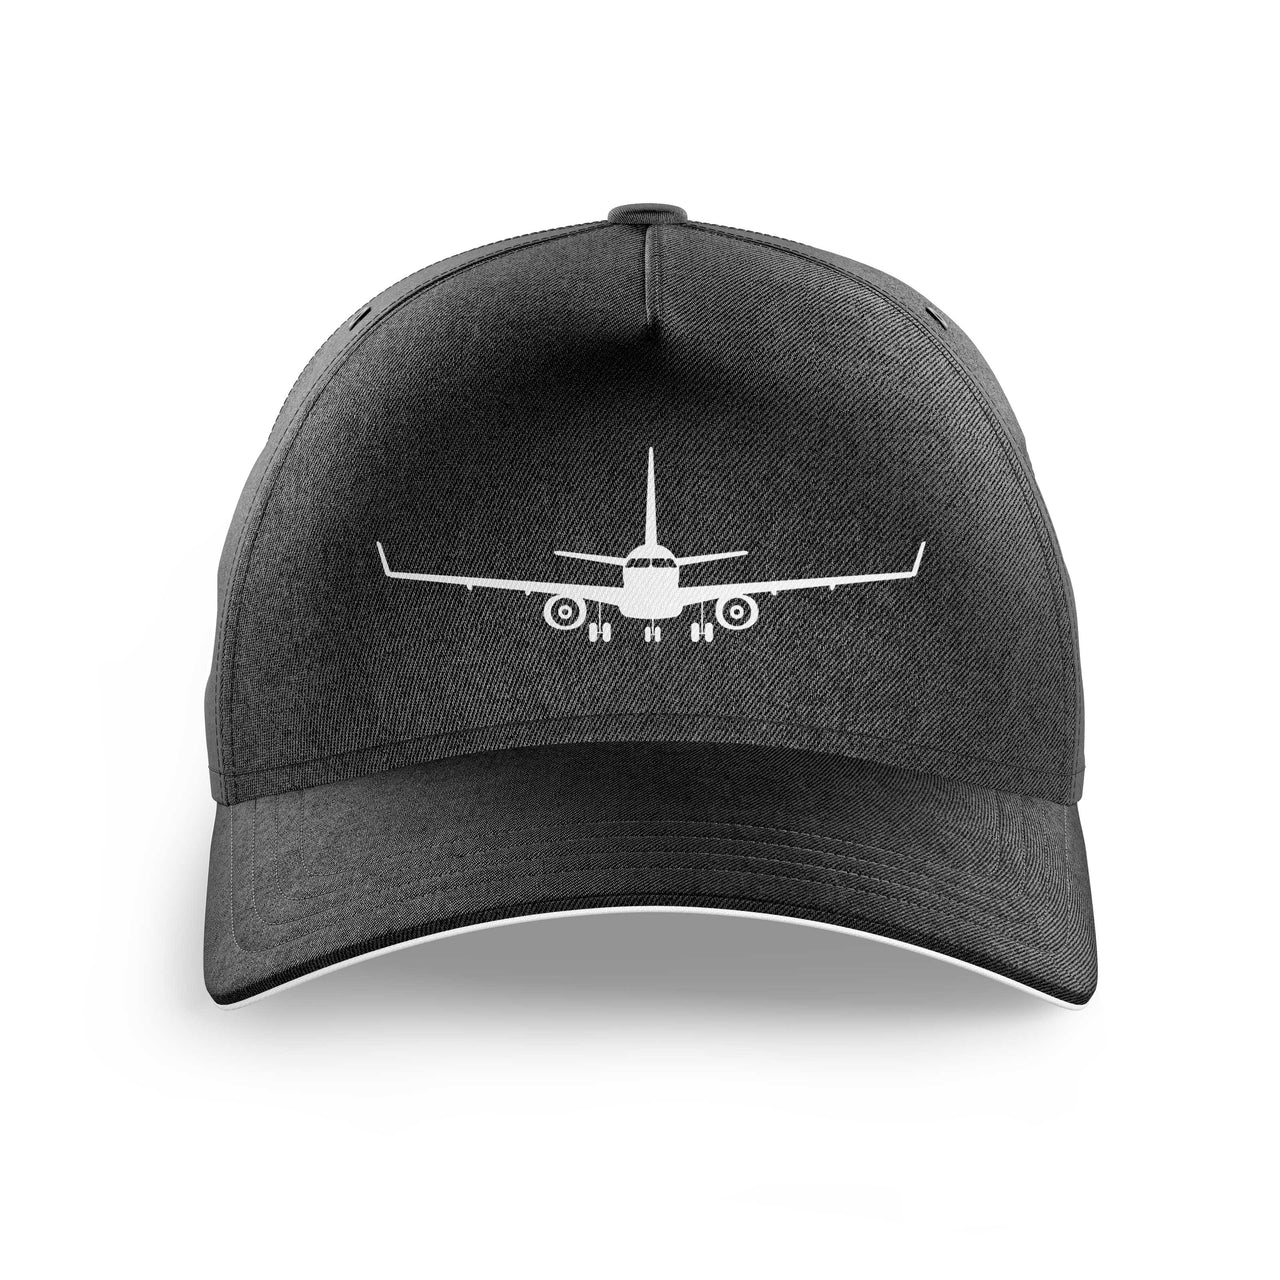 Embraer E-190 Silhouette Printed Hats